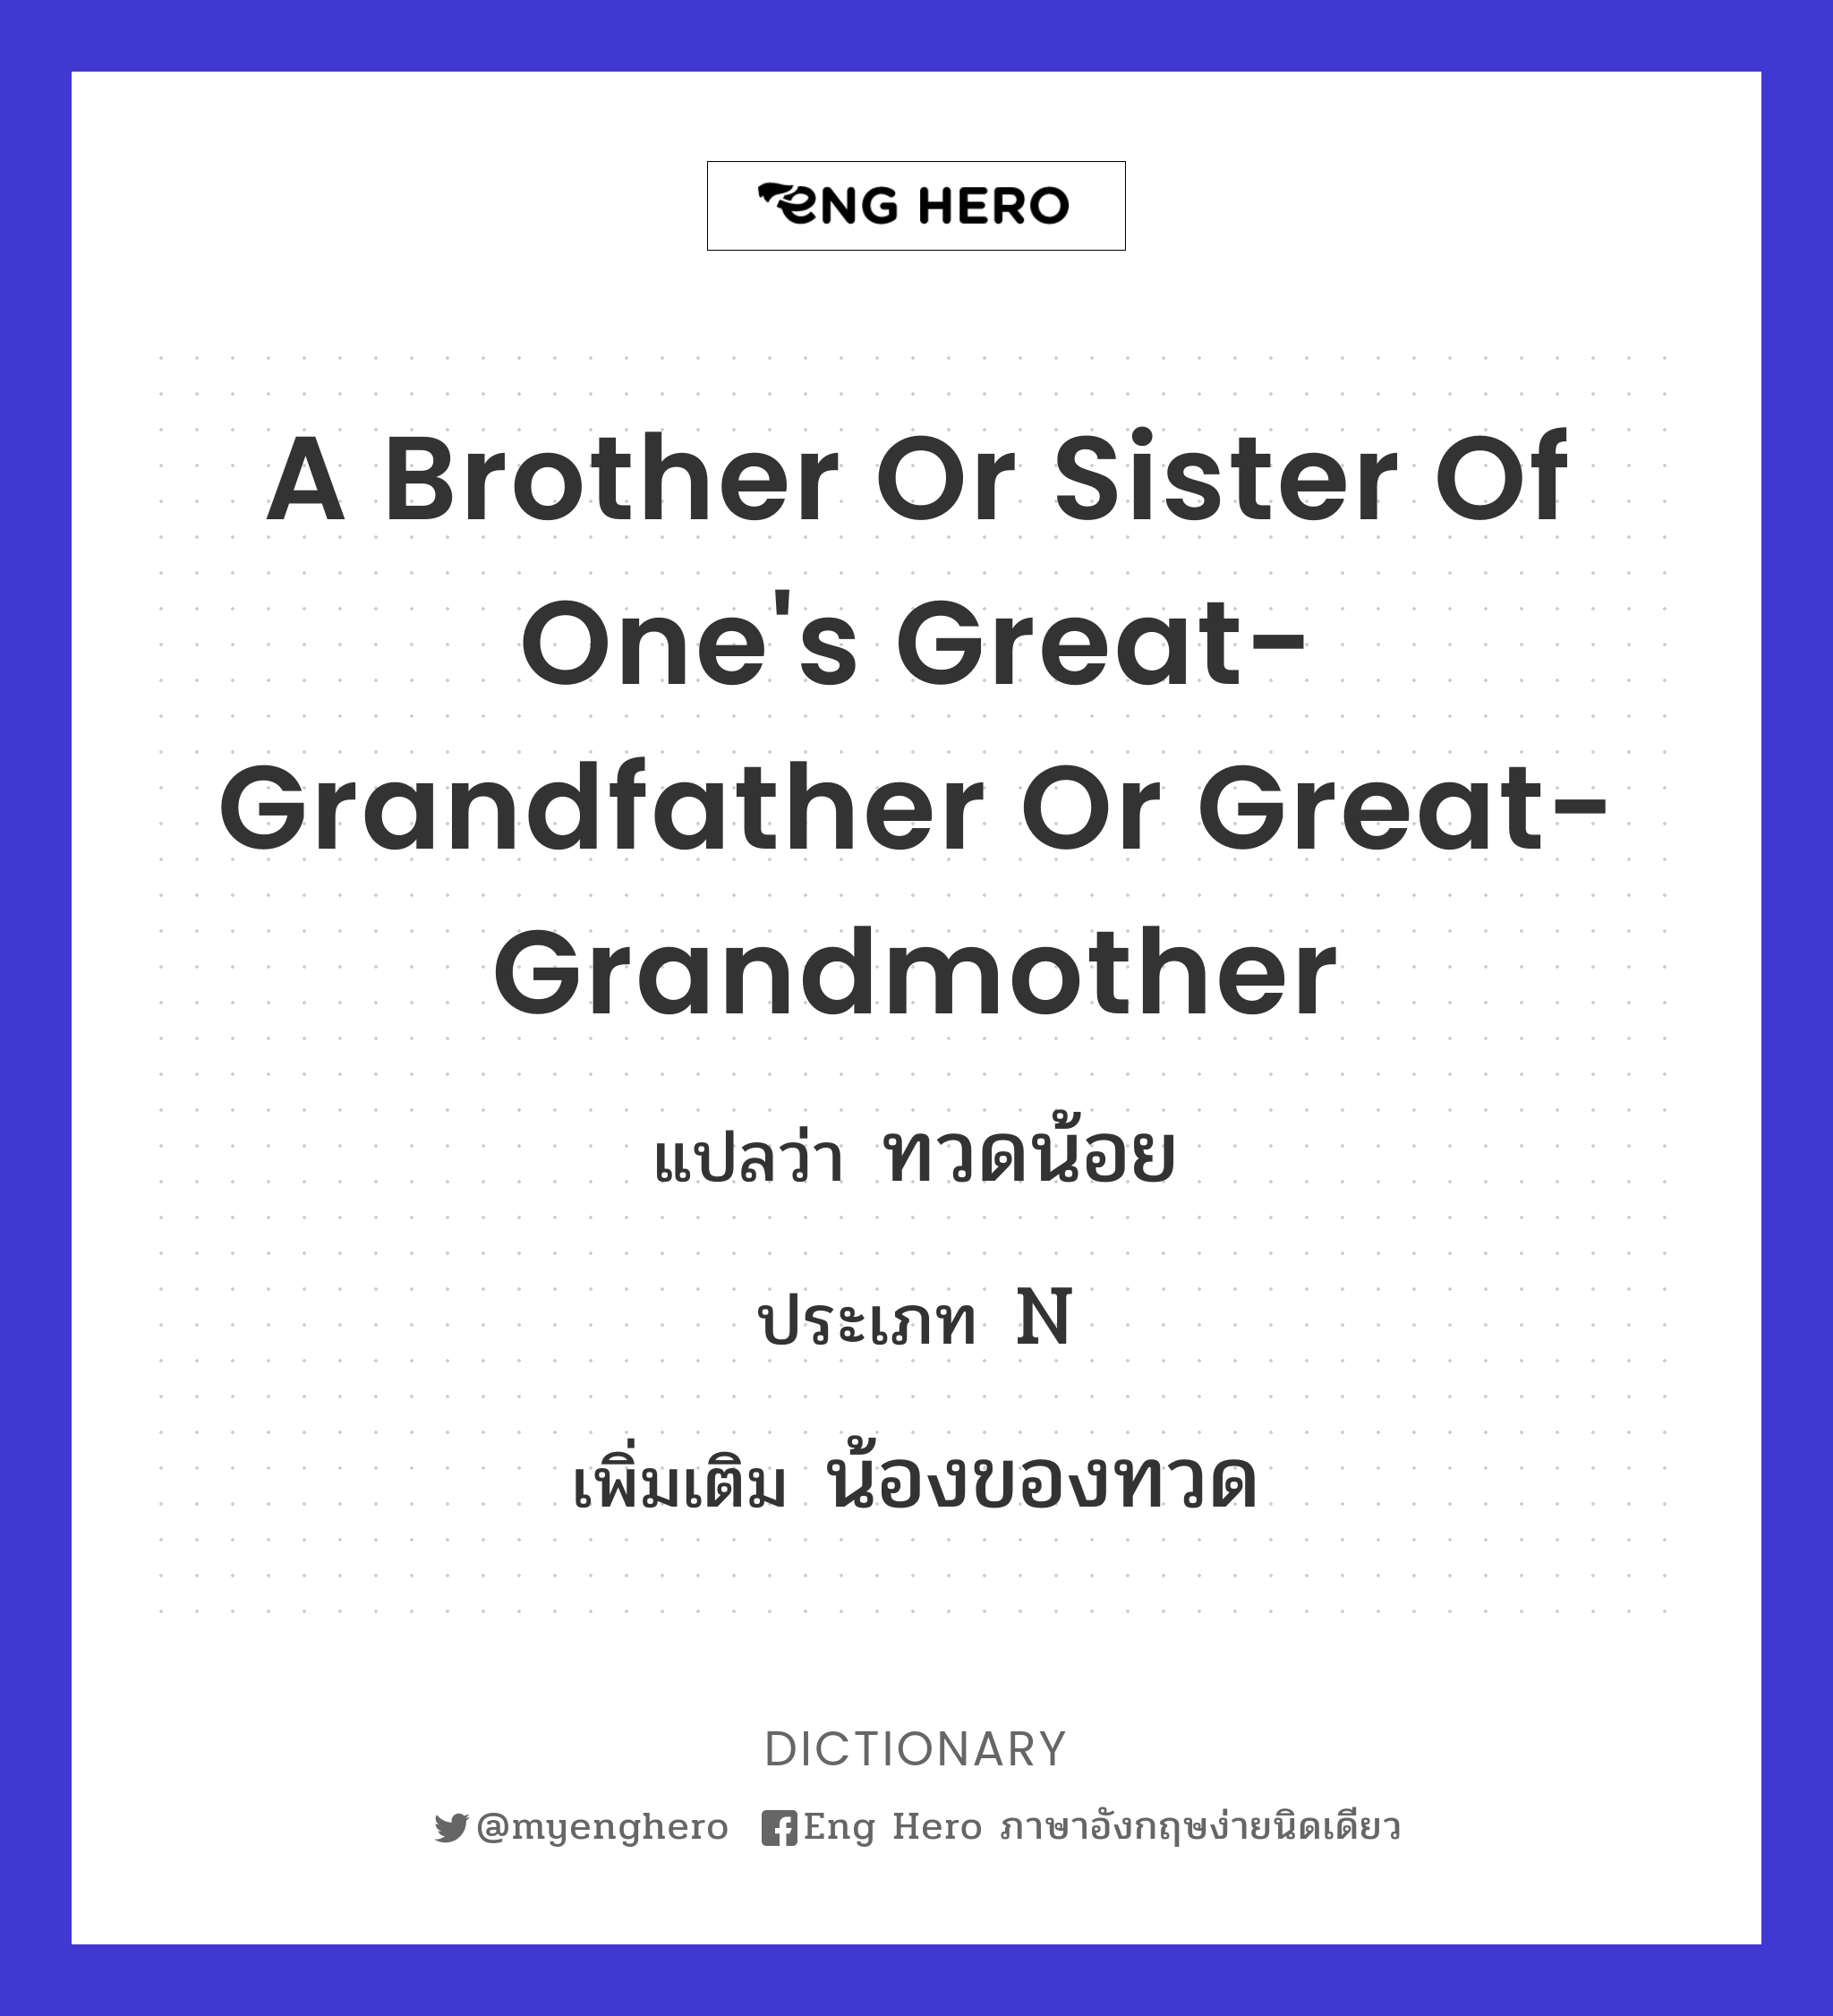 a brother or sister of one's great-grandfather or great-grandmother